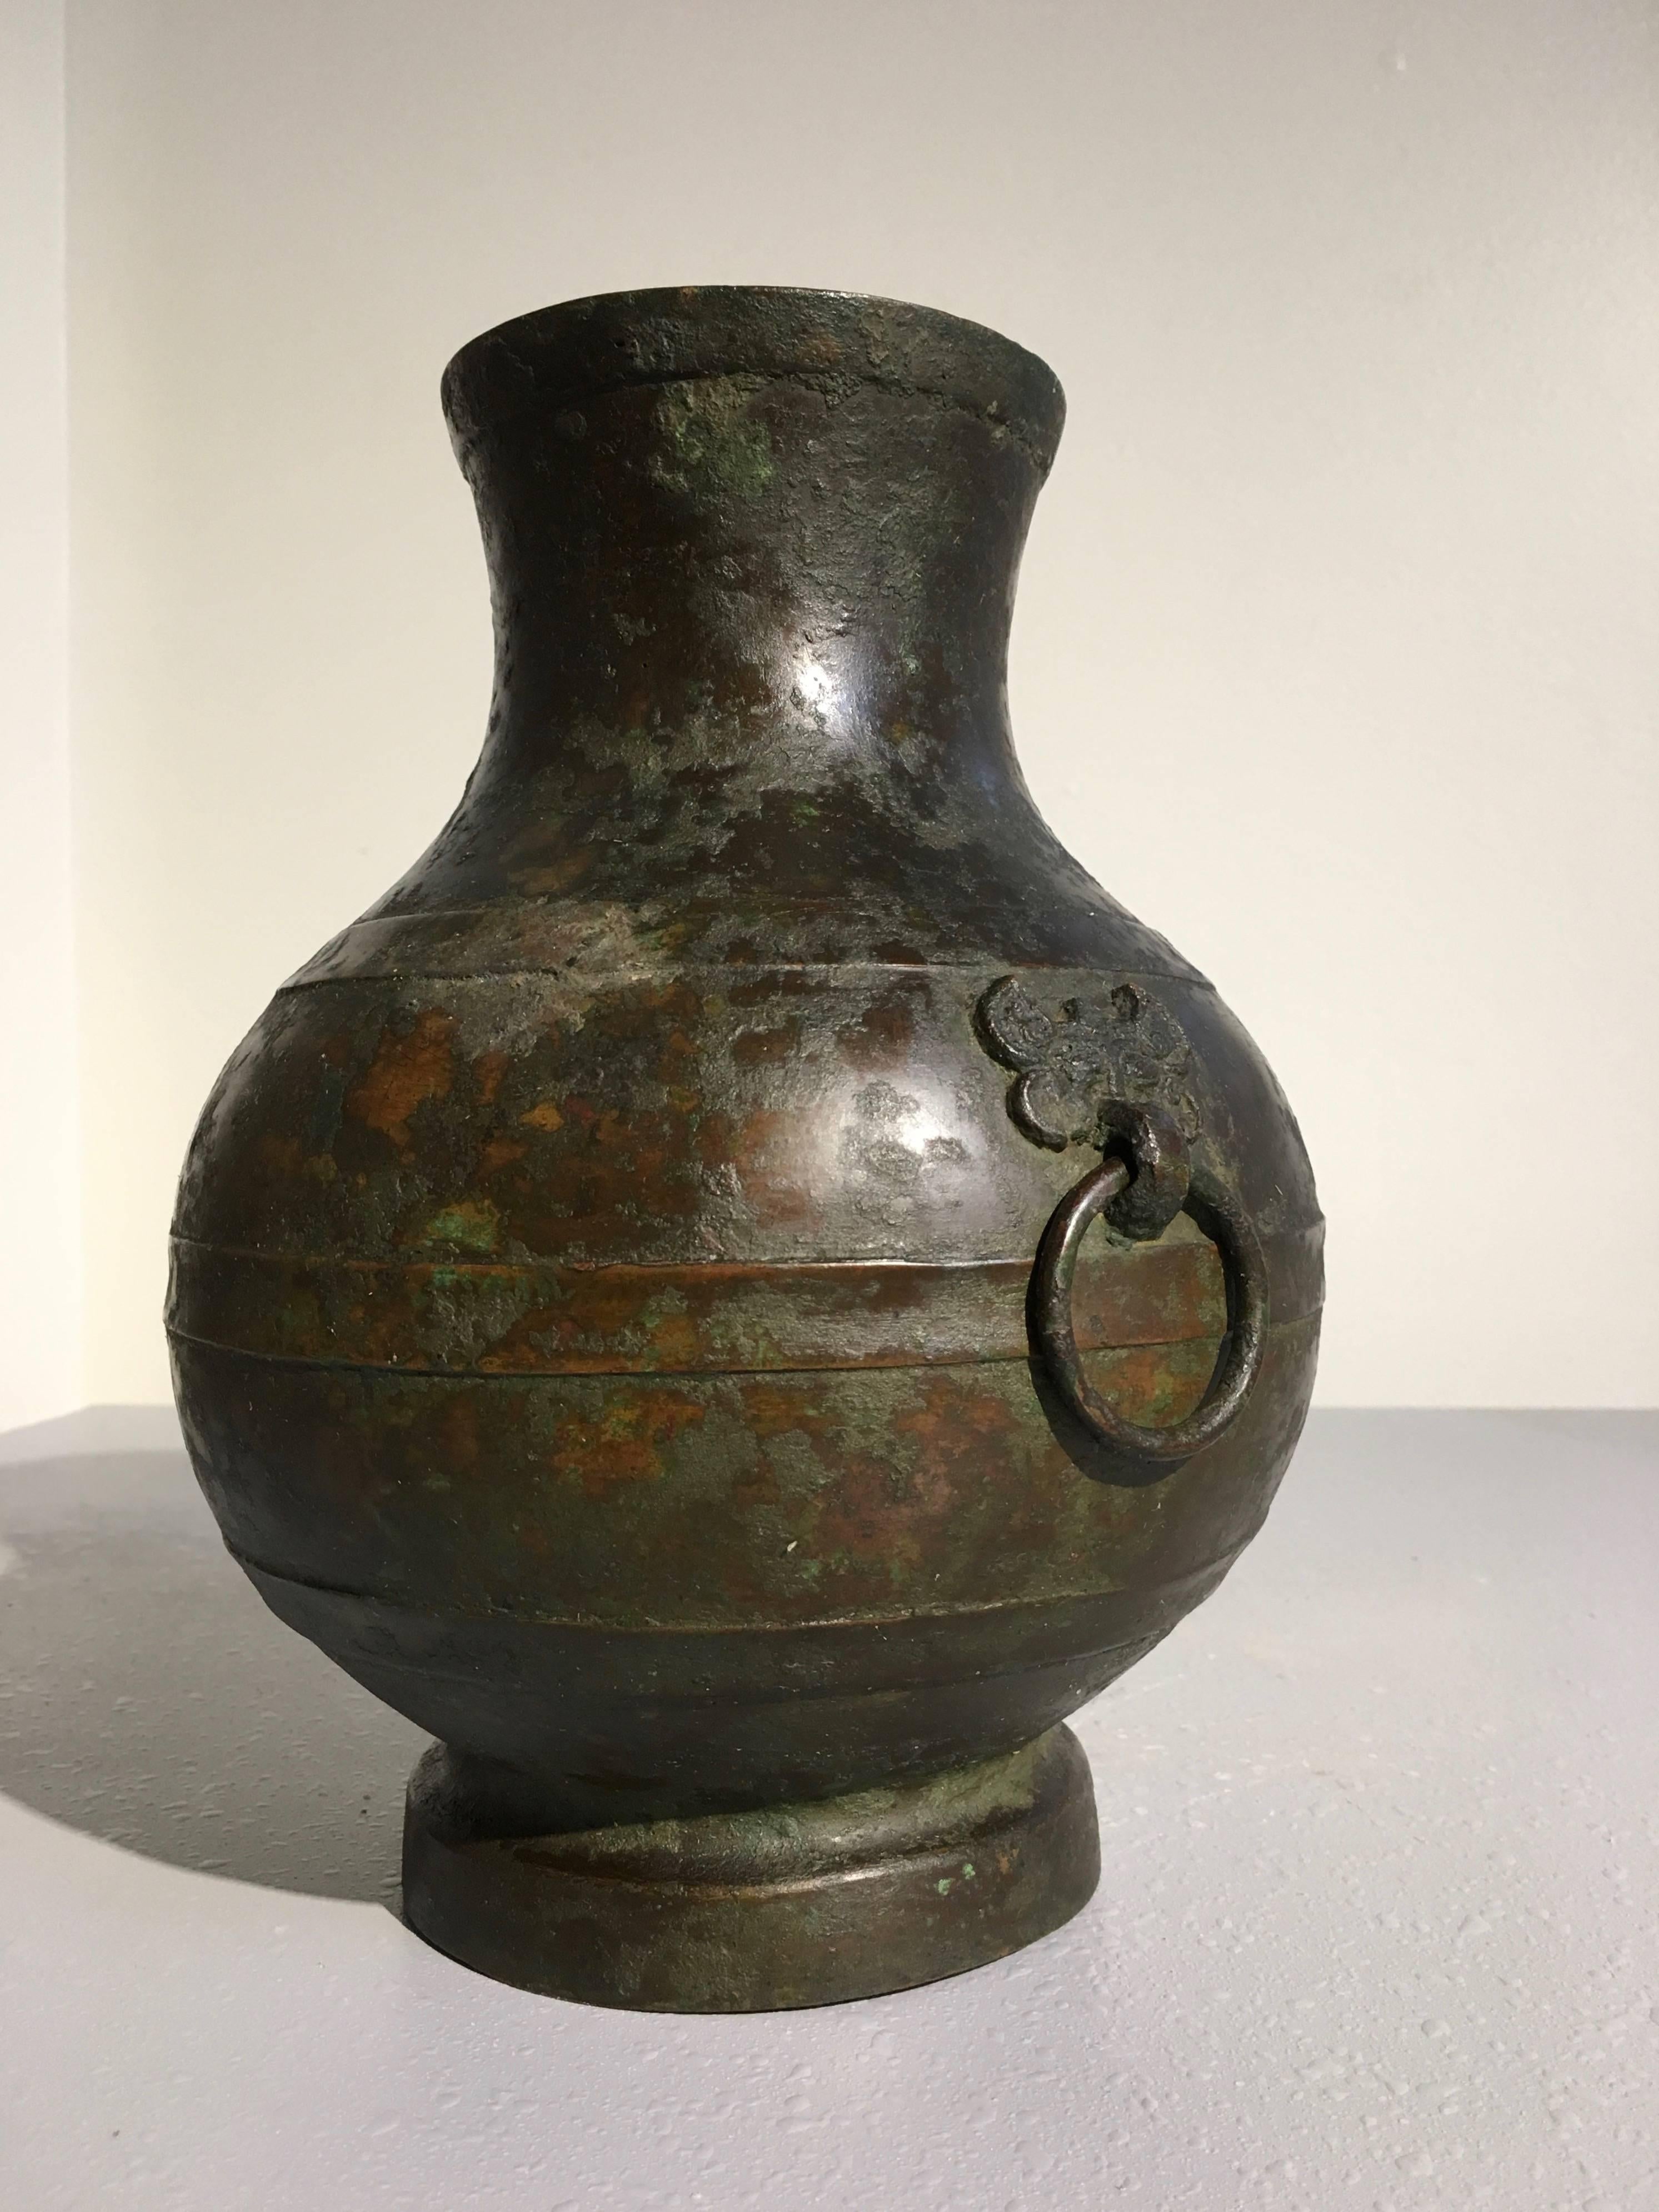 A lovely bronze vessel of archaistic 